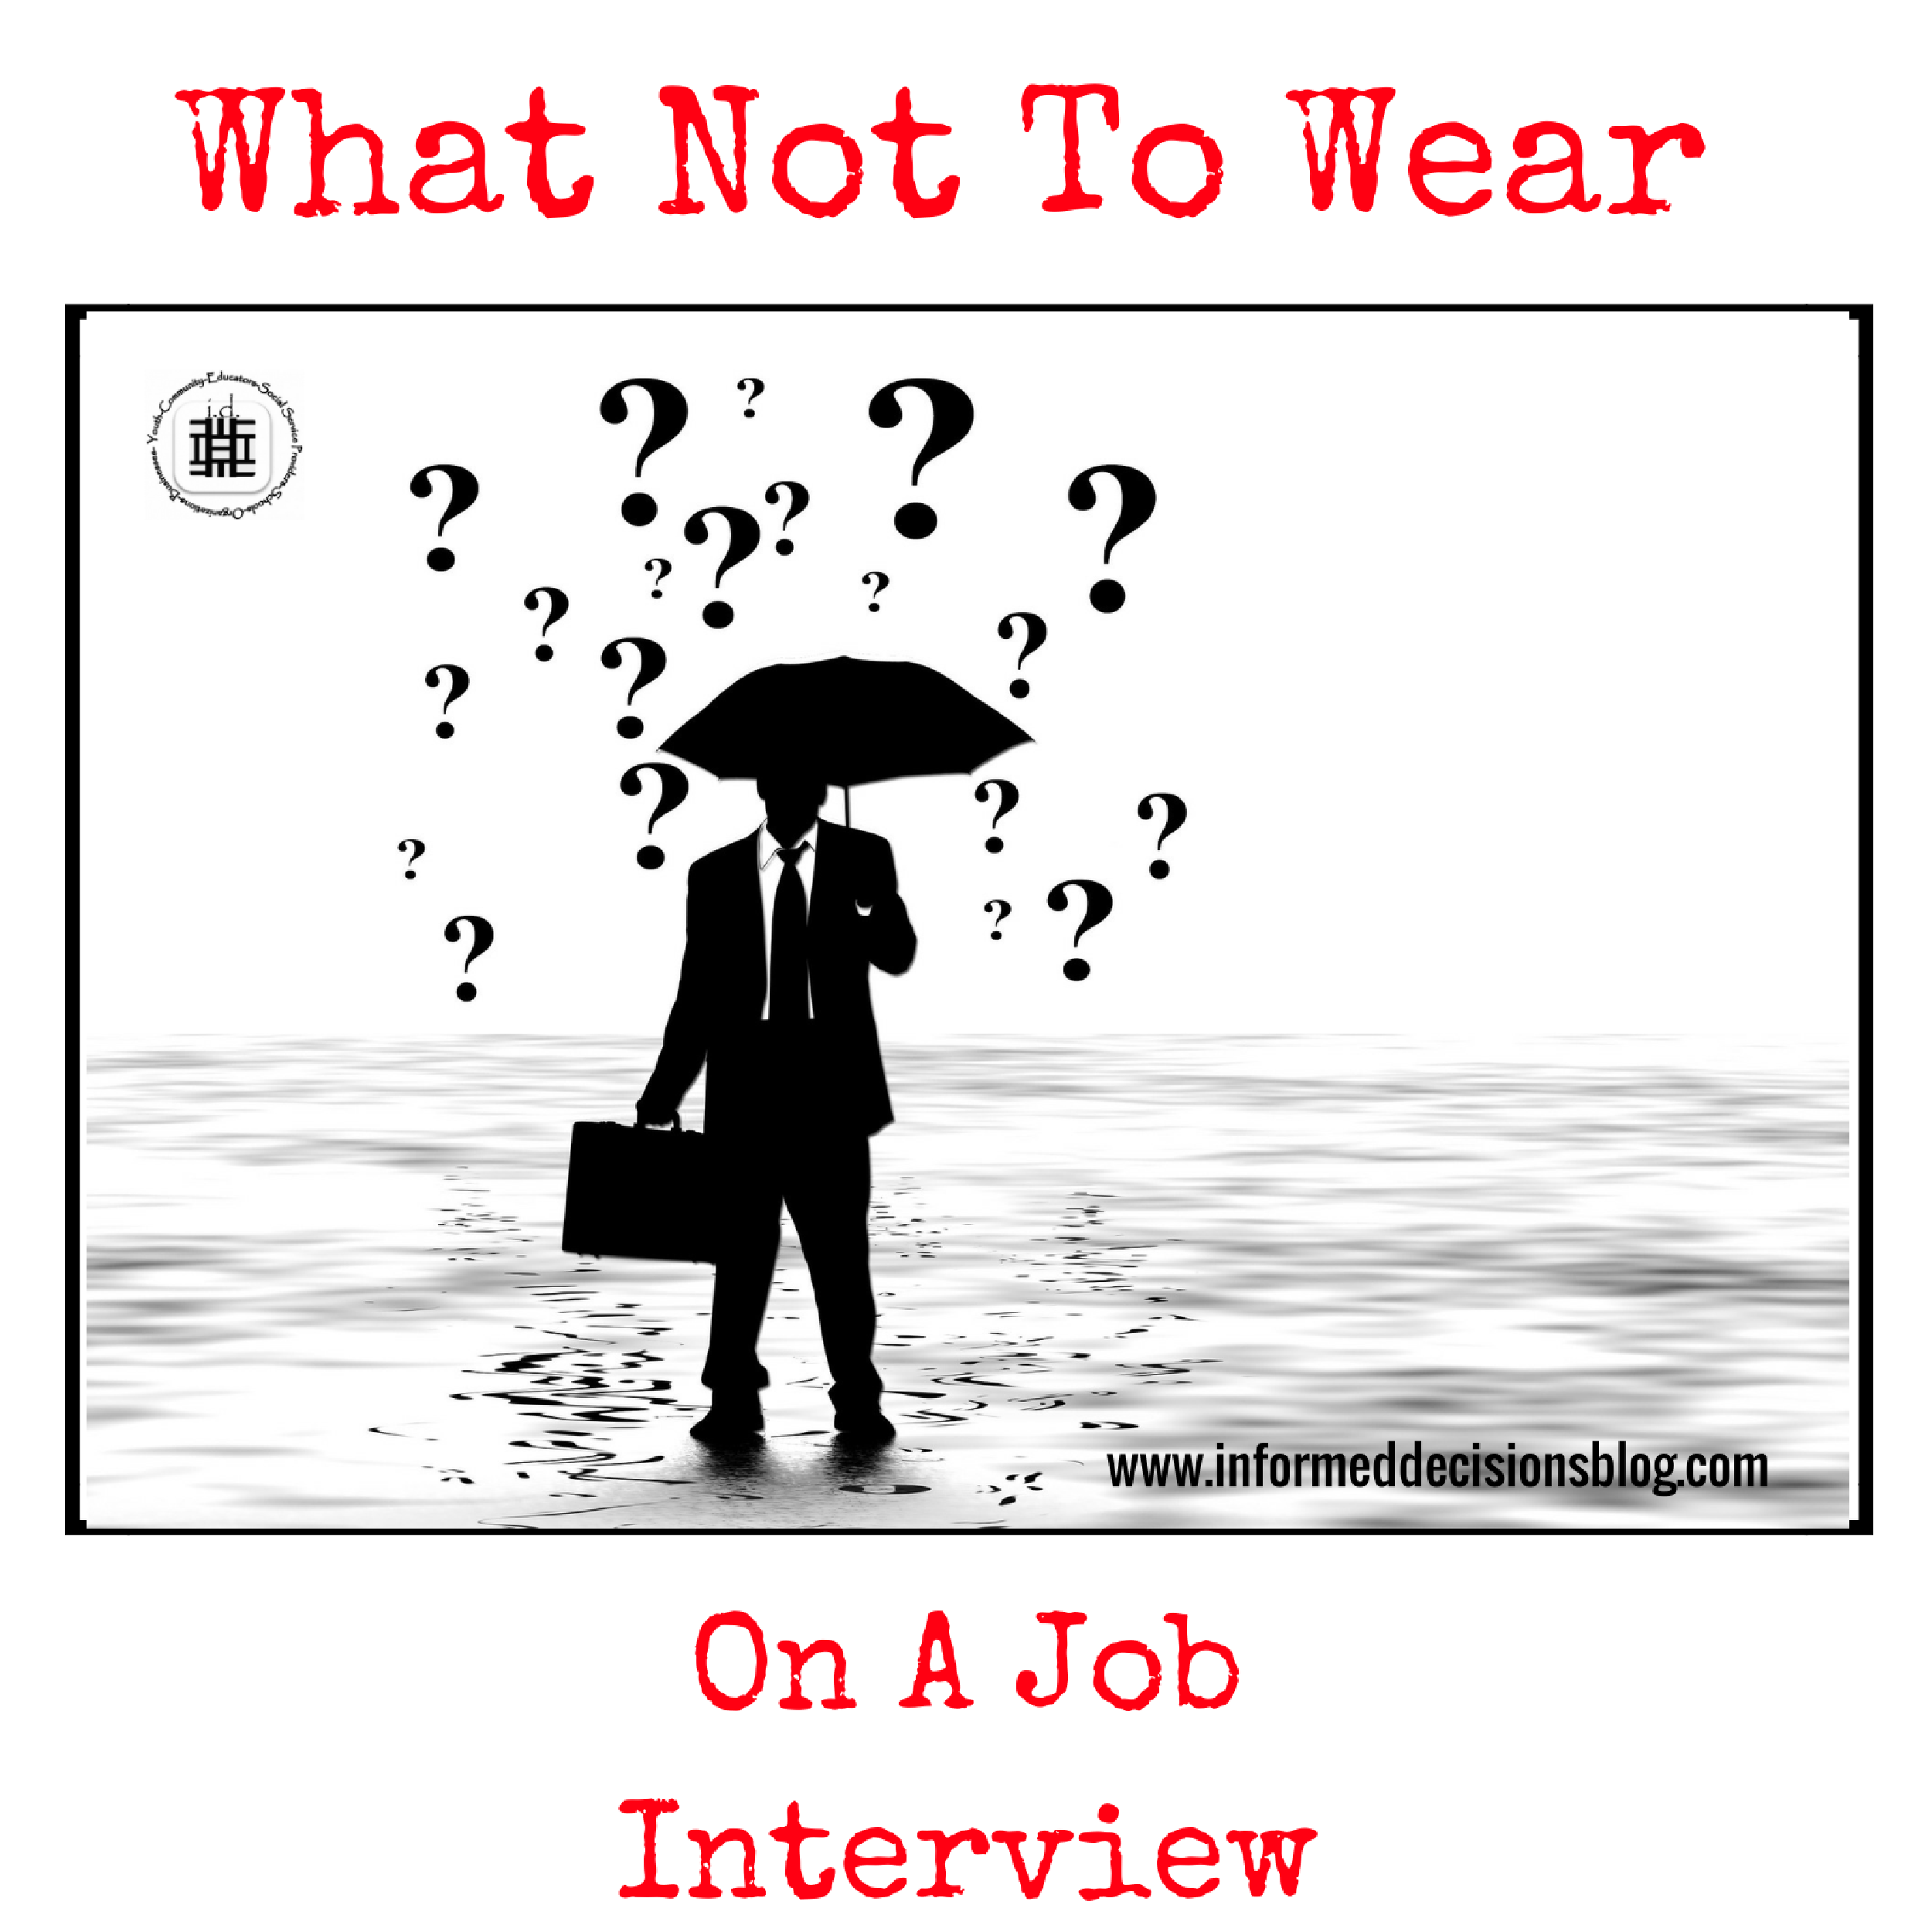 What Not to Wear on a Job Interview